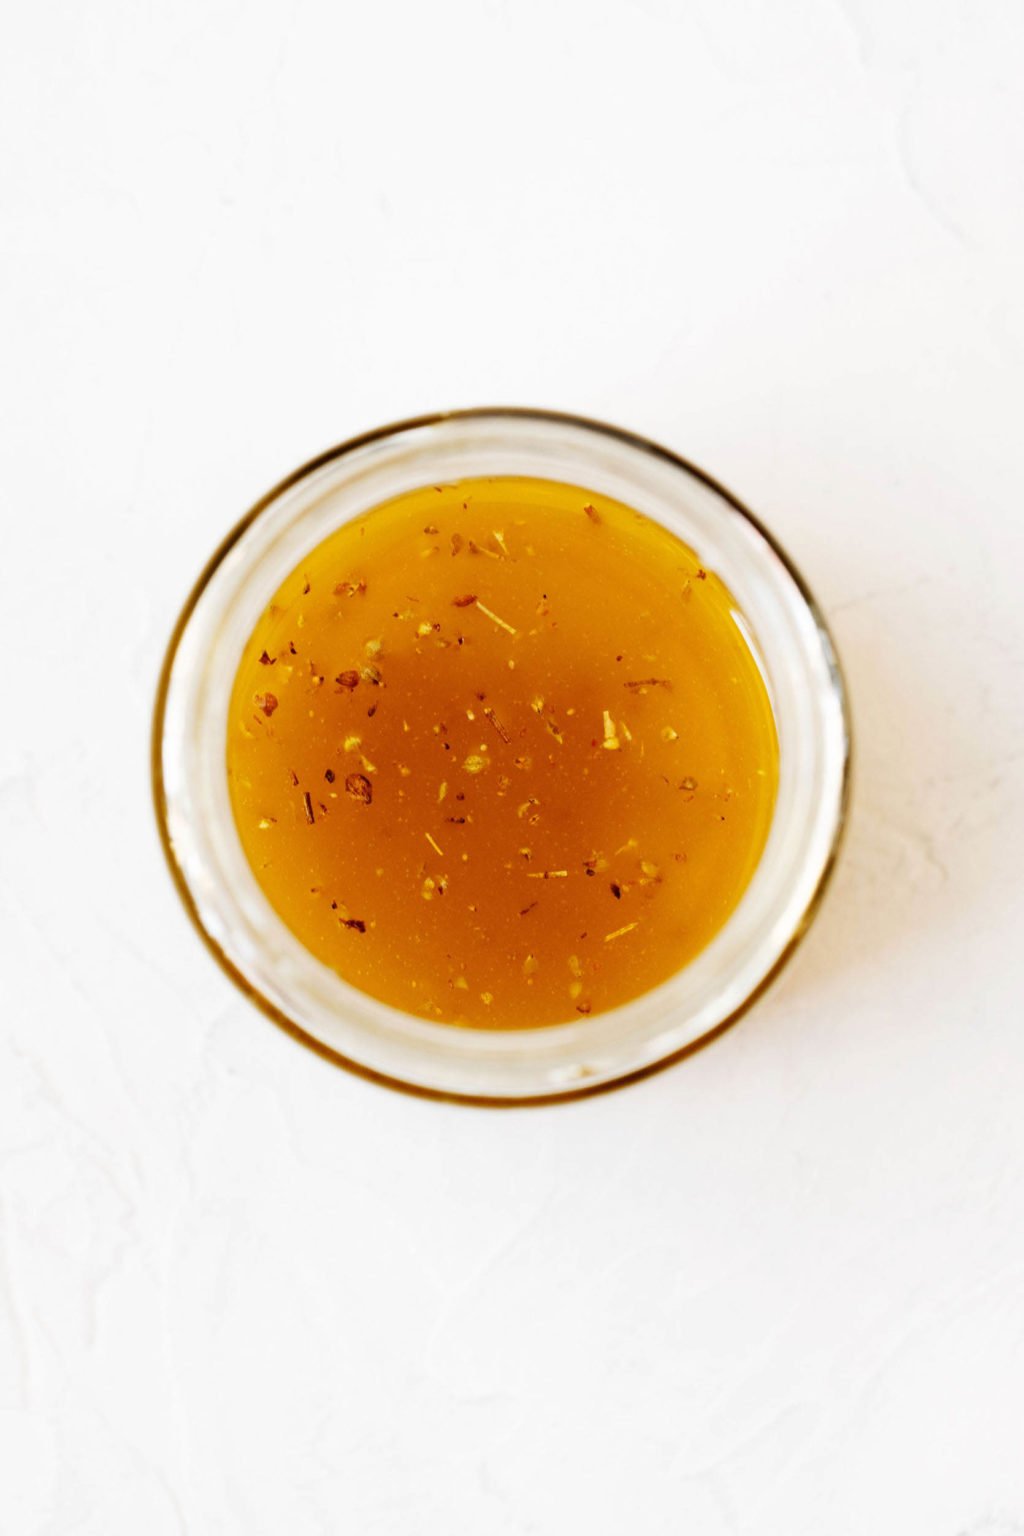 An overhead image of a clear, glass jar of homemade vinaigrette, resting on a white surface.